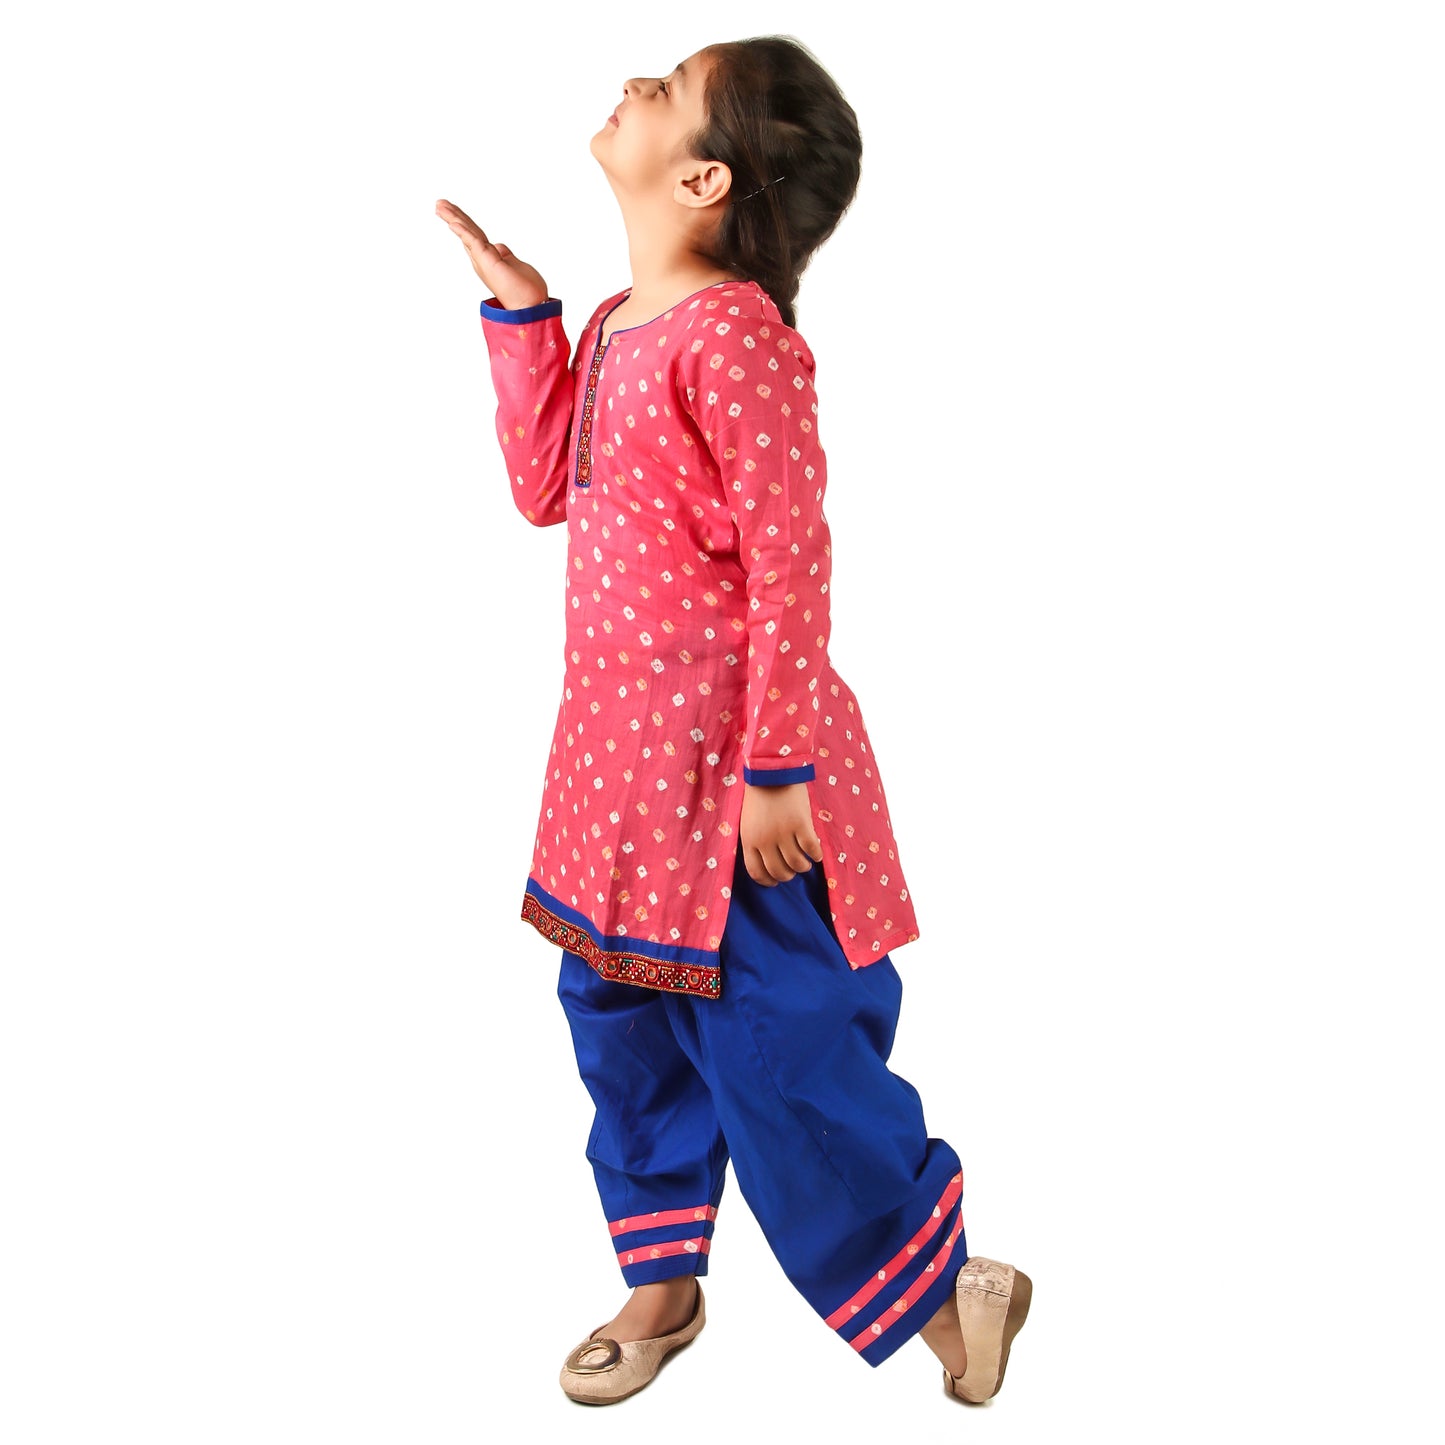 Pink Bandhani Salwar Suit for Girls, Ages 6 Months to 16 Years, Cotton, Tie-Dye